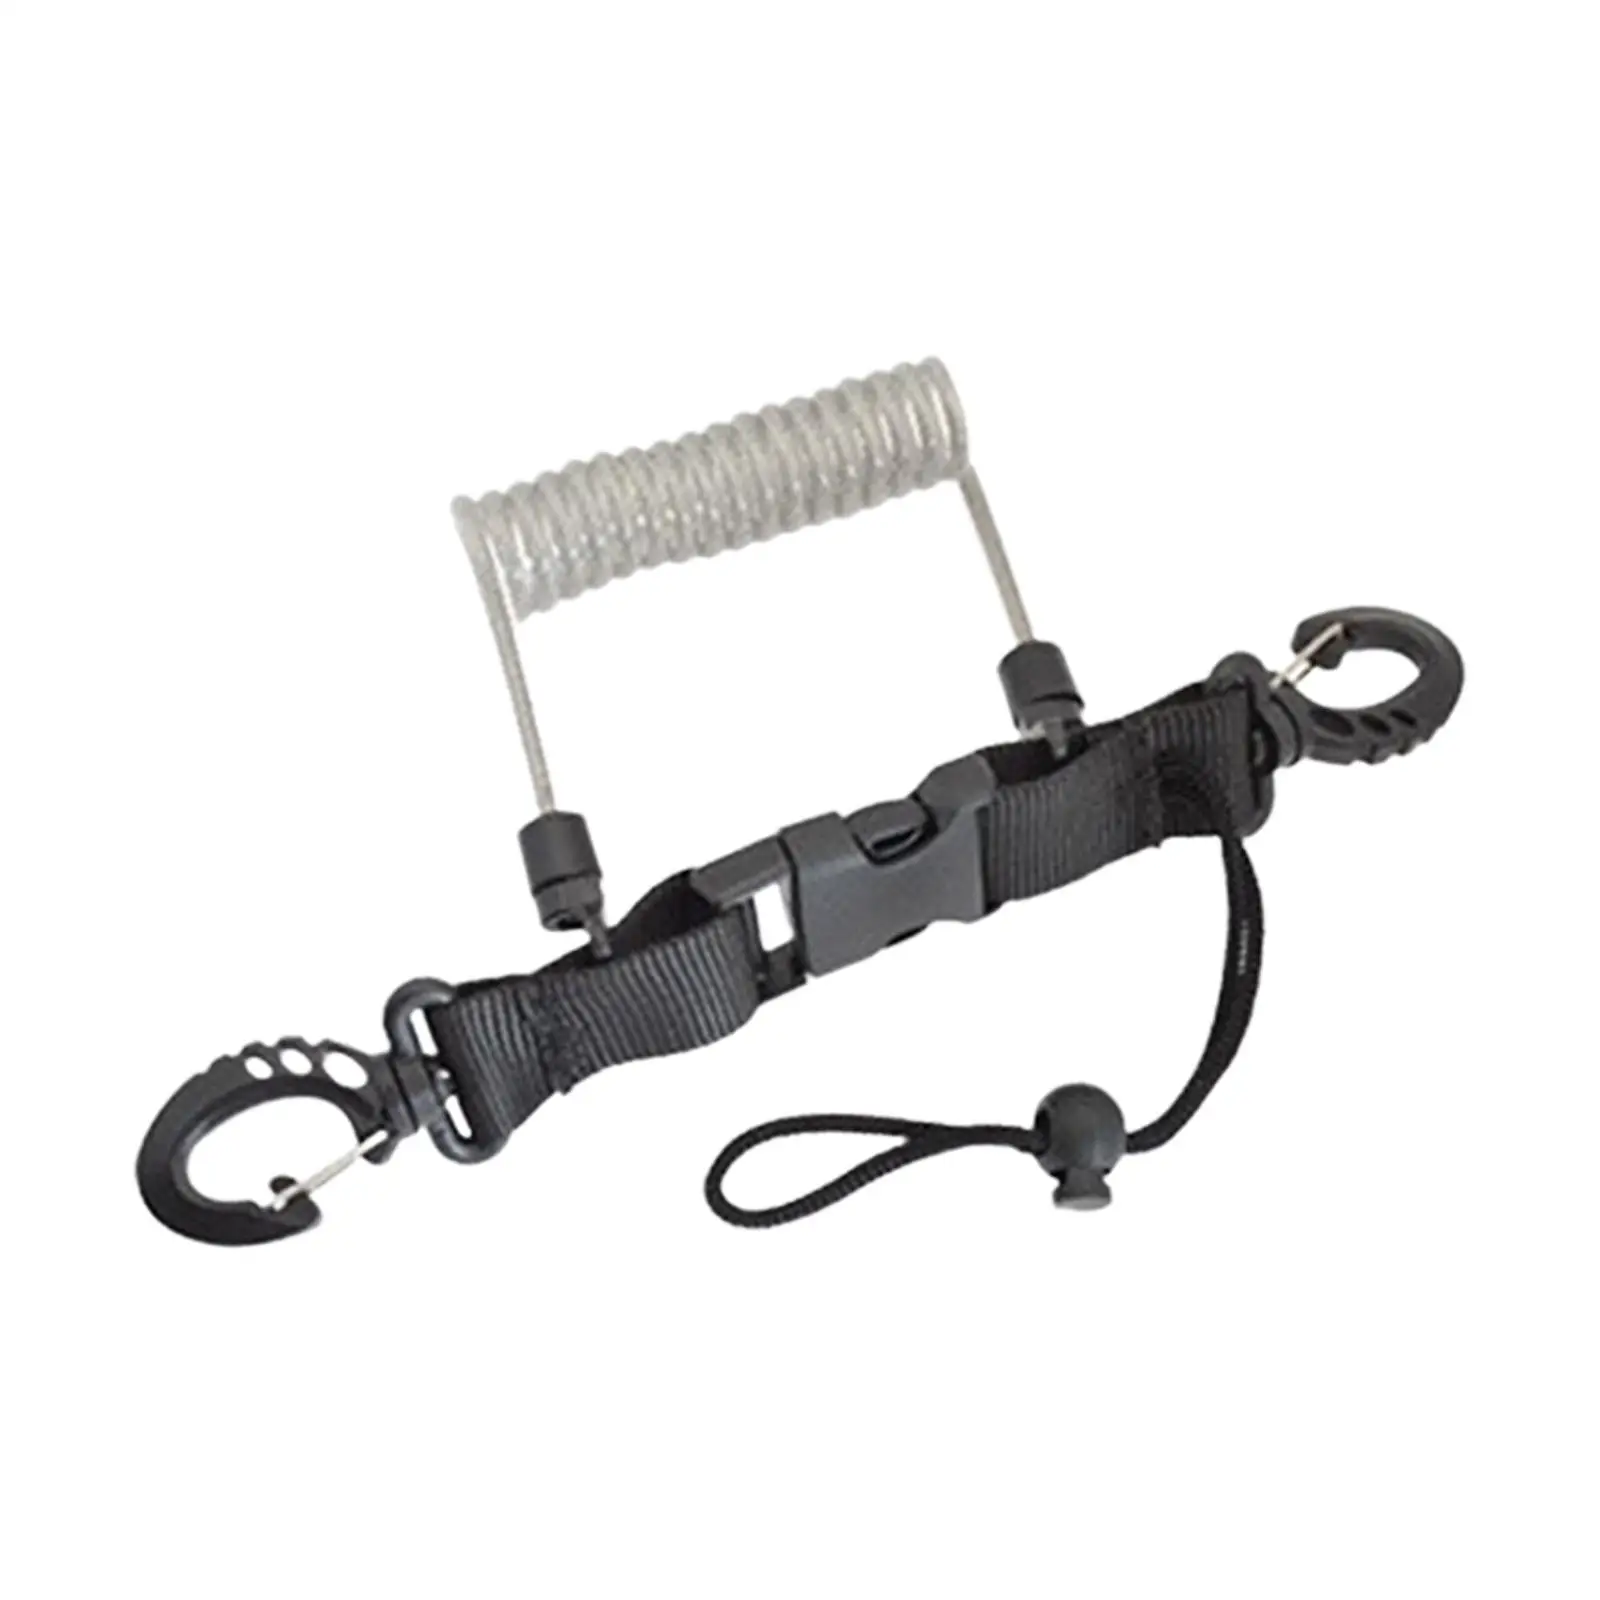 Snappy of Coil Lanyard with Clips and Quick Release Buckle Lightweight Durable